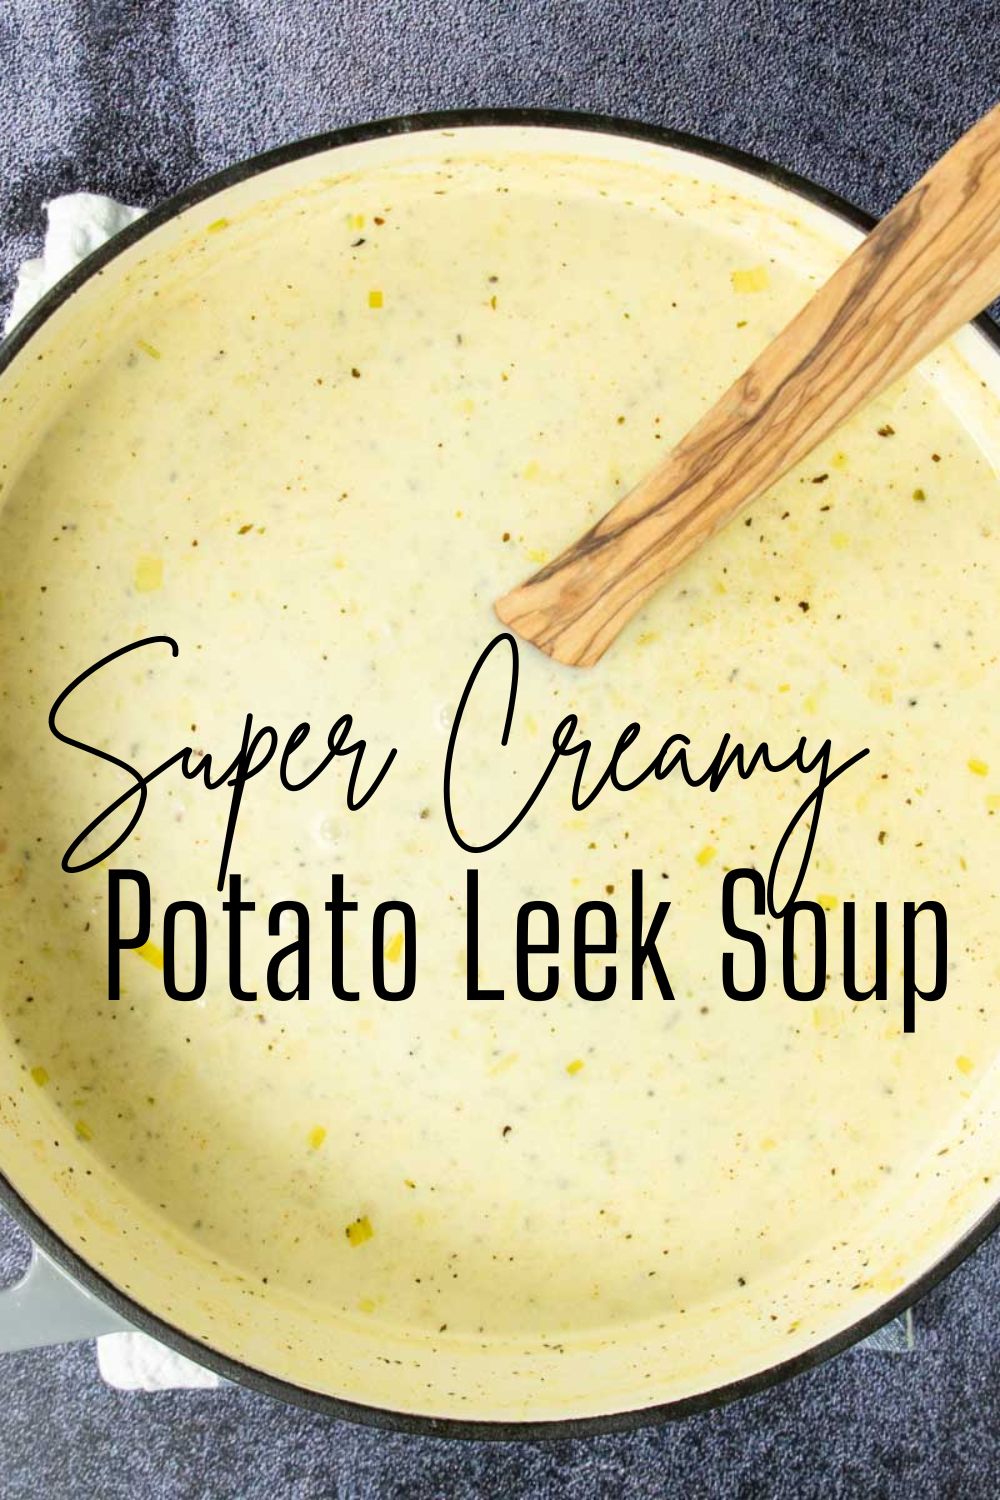 Potato Leek Soup recipe image with text overlay for Pinterest